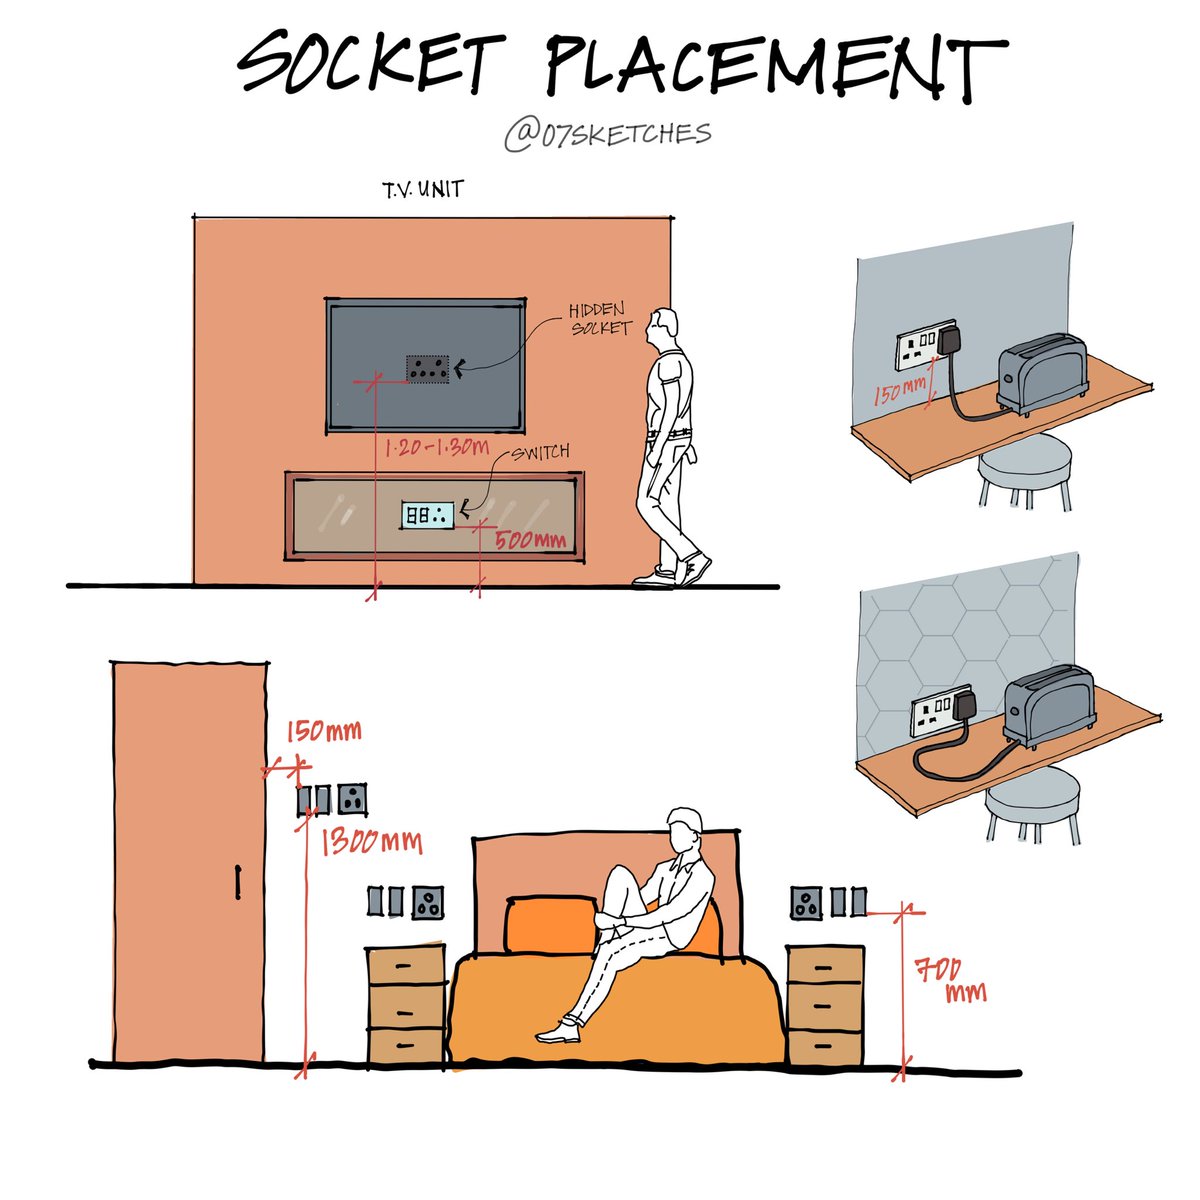 Socket placement tips